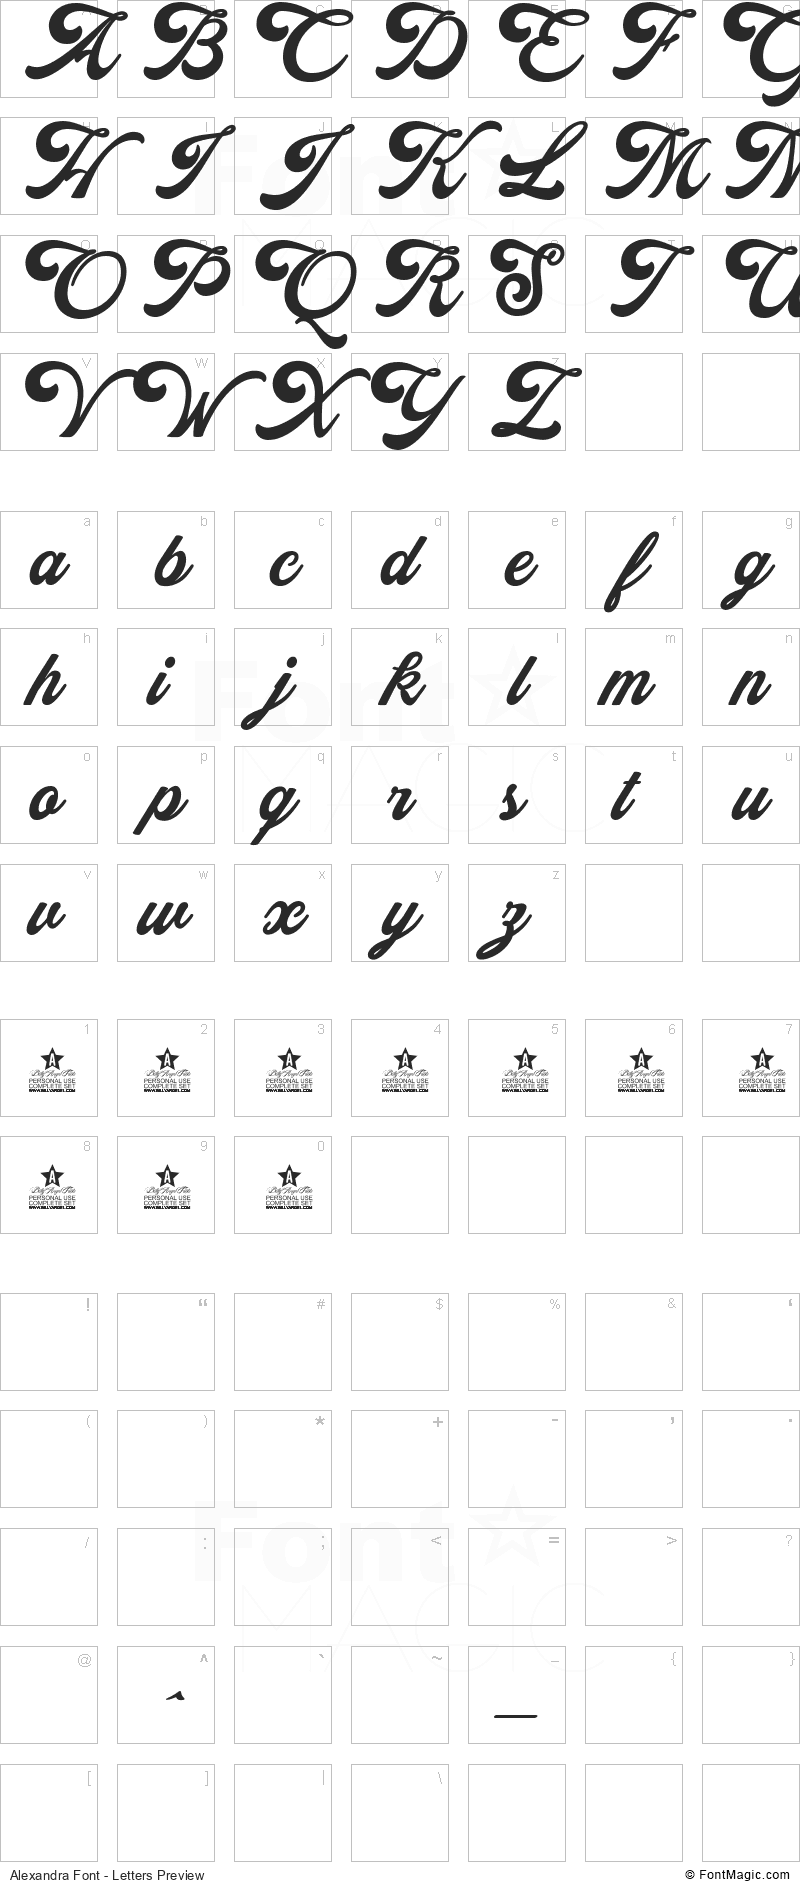 Alexandra Font - All Latters Preview Chart